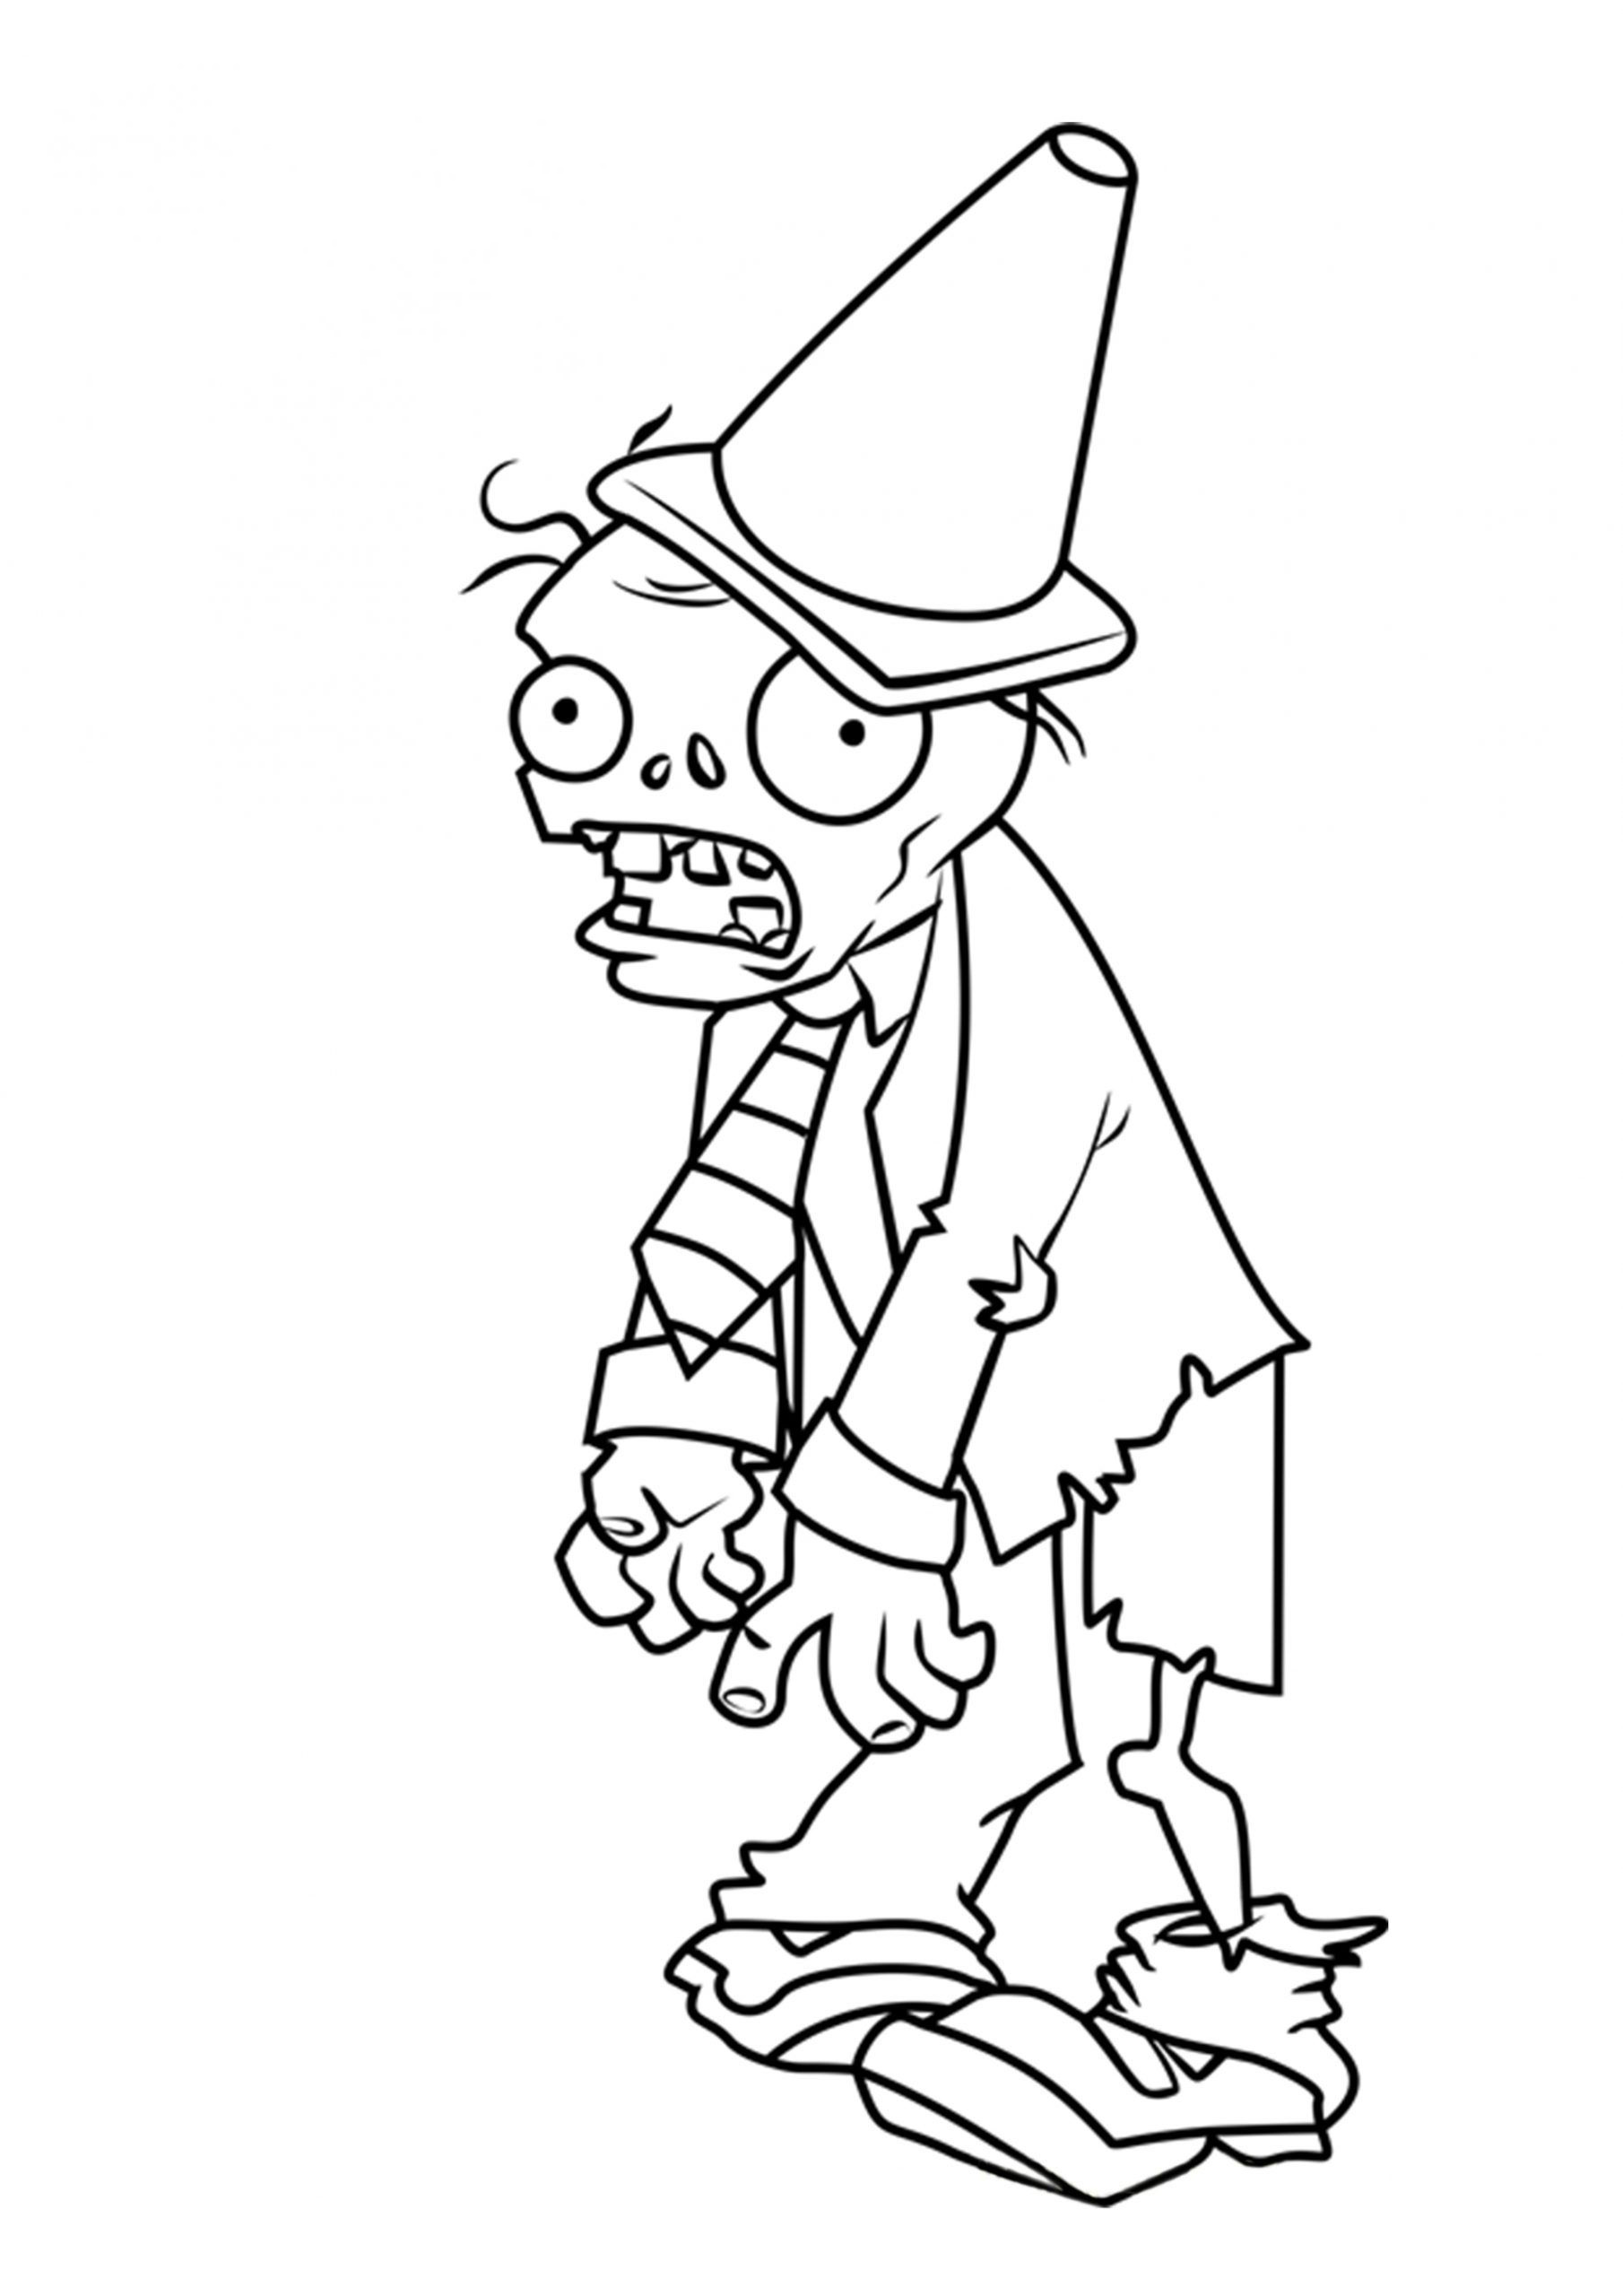 Conehead Zombie Coloring Page